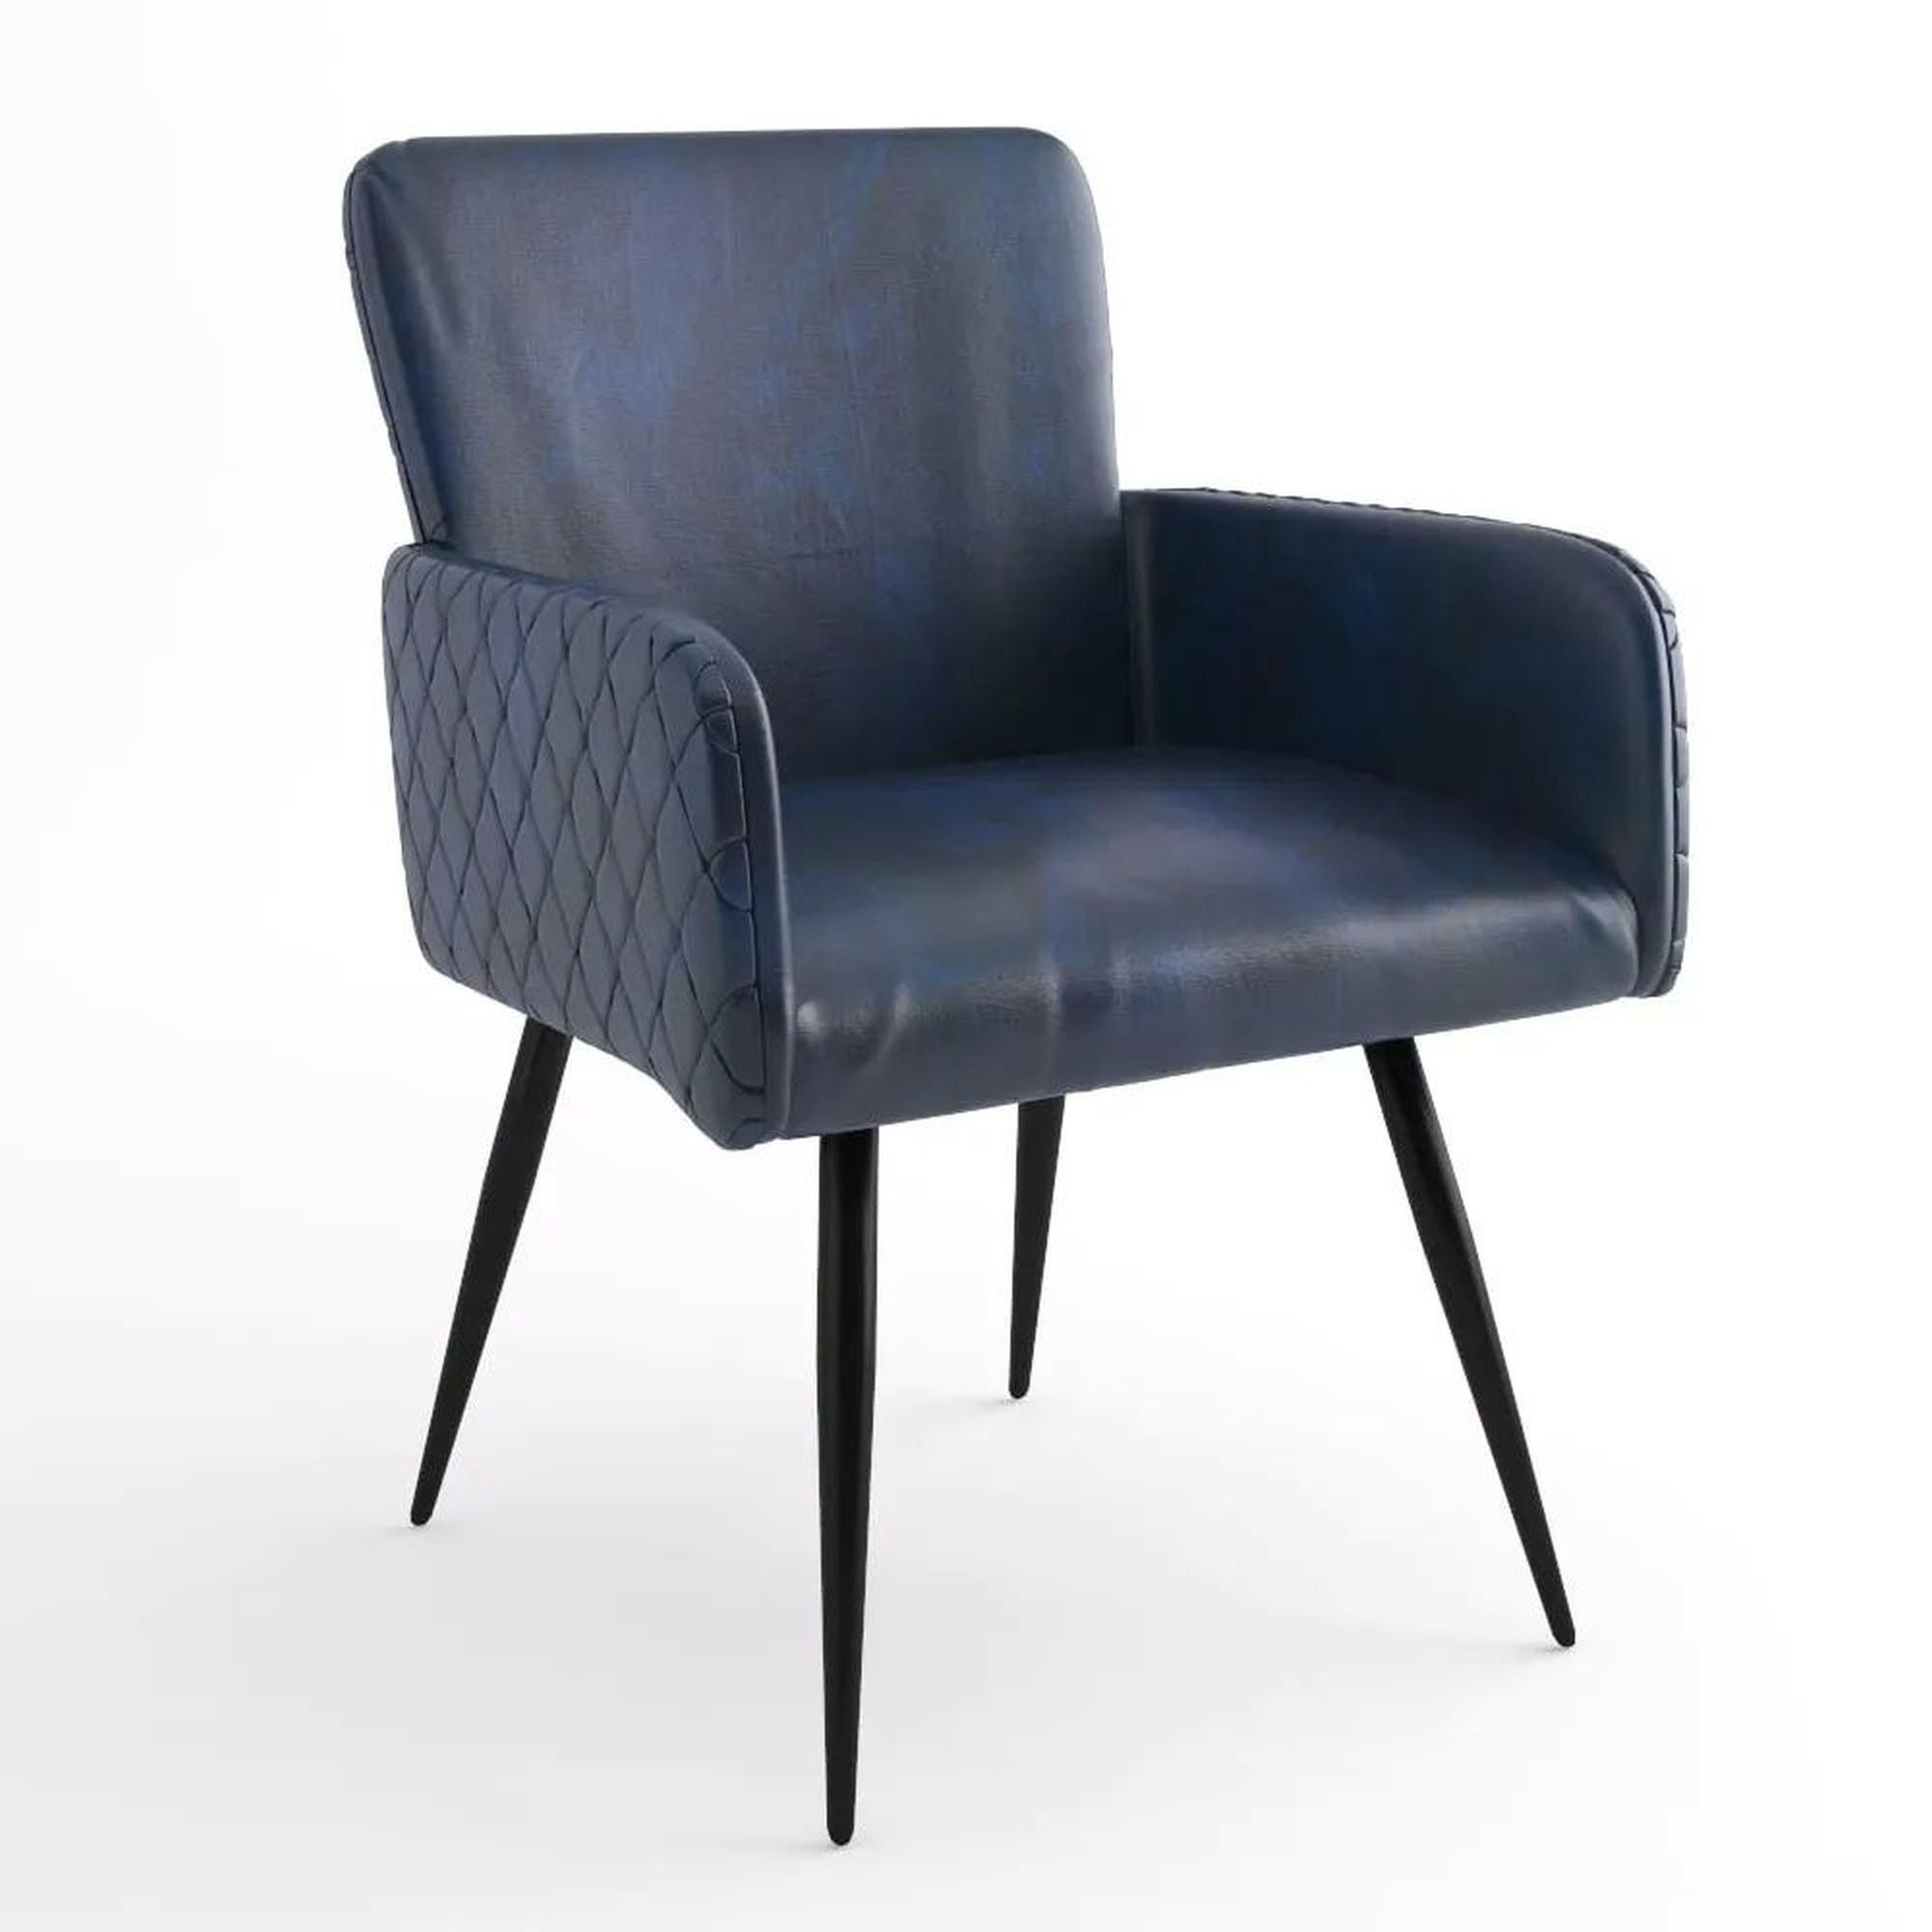 Stanton Navy Blue Dining Armchair, Genuine Leather with Metal Legs (Sold in Pairs)